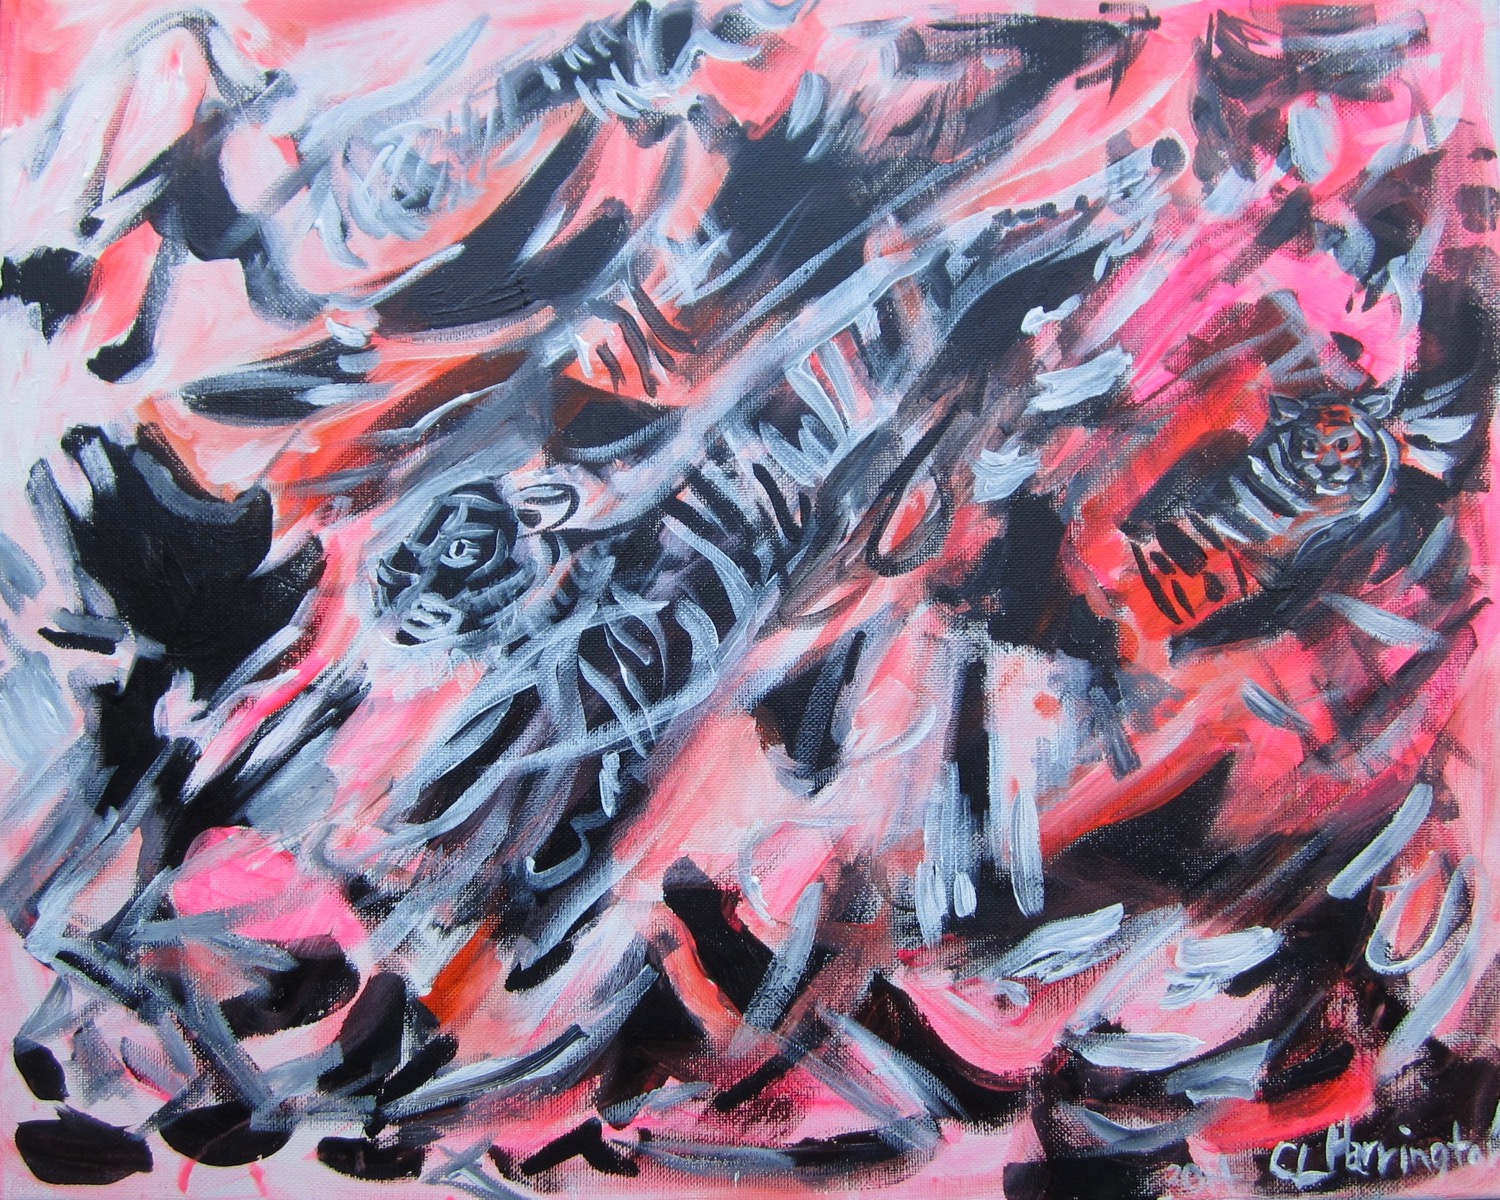 Action Tigers, Acrylic on Canvas, 16 x 20 inches, 2014